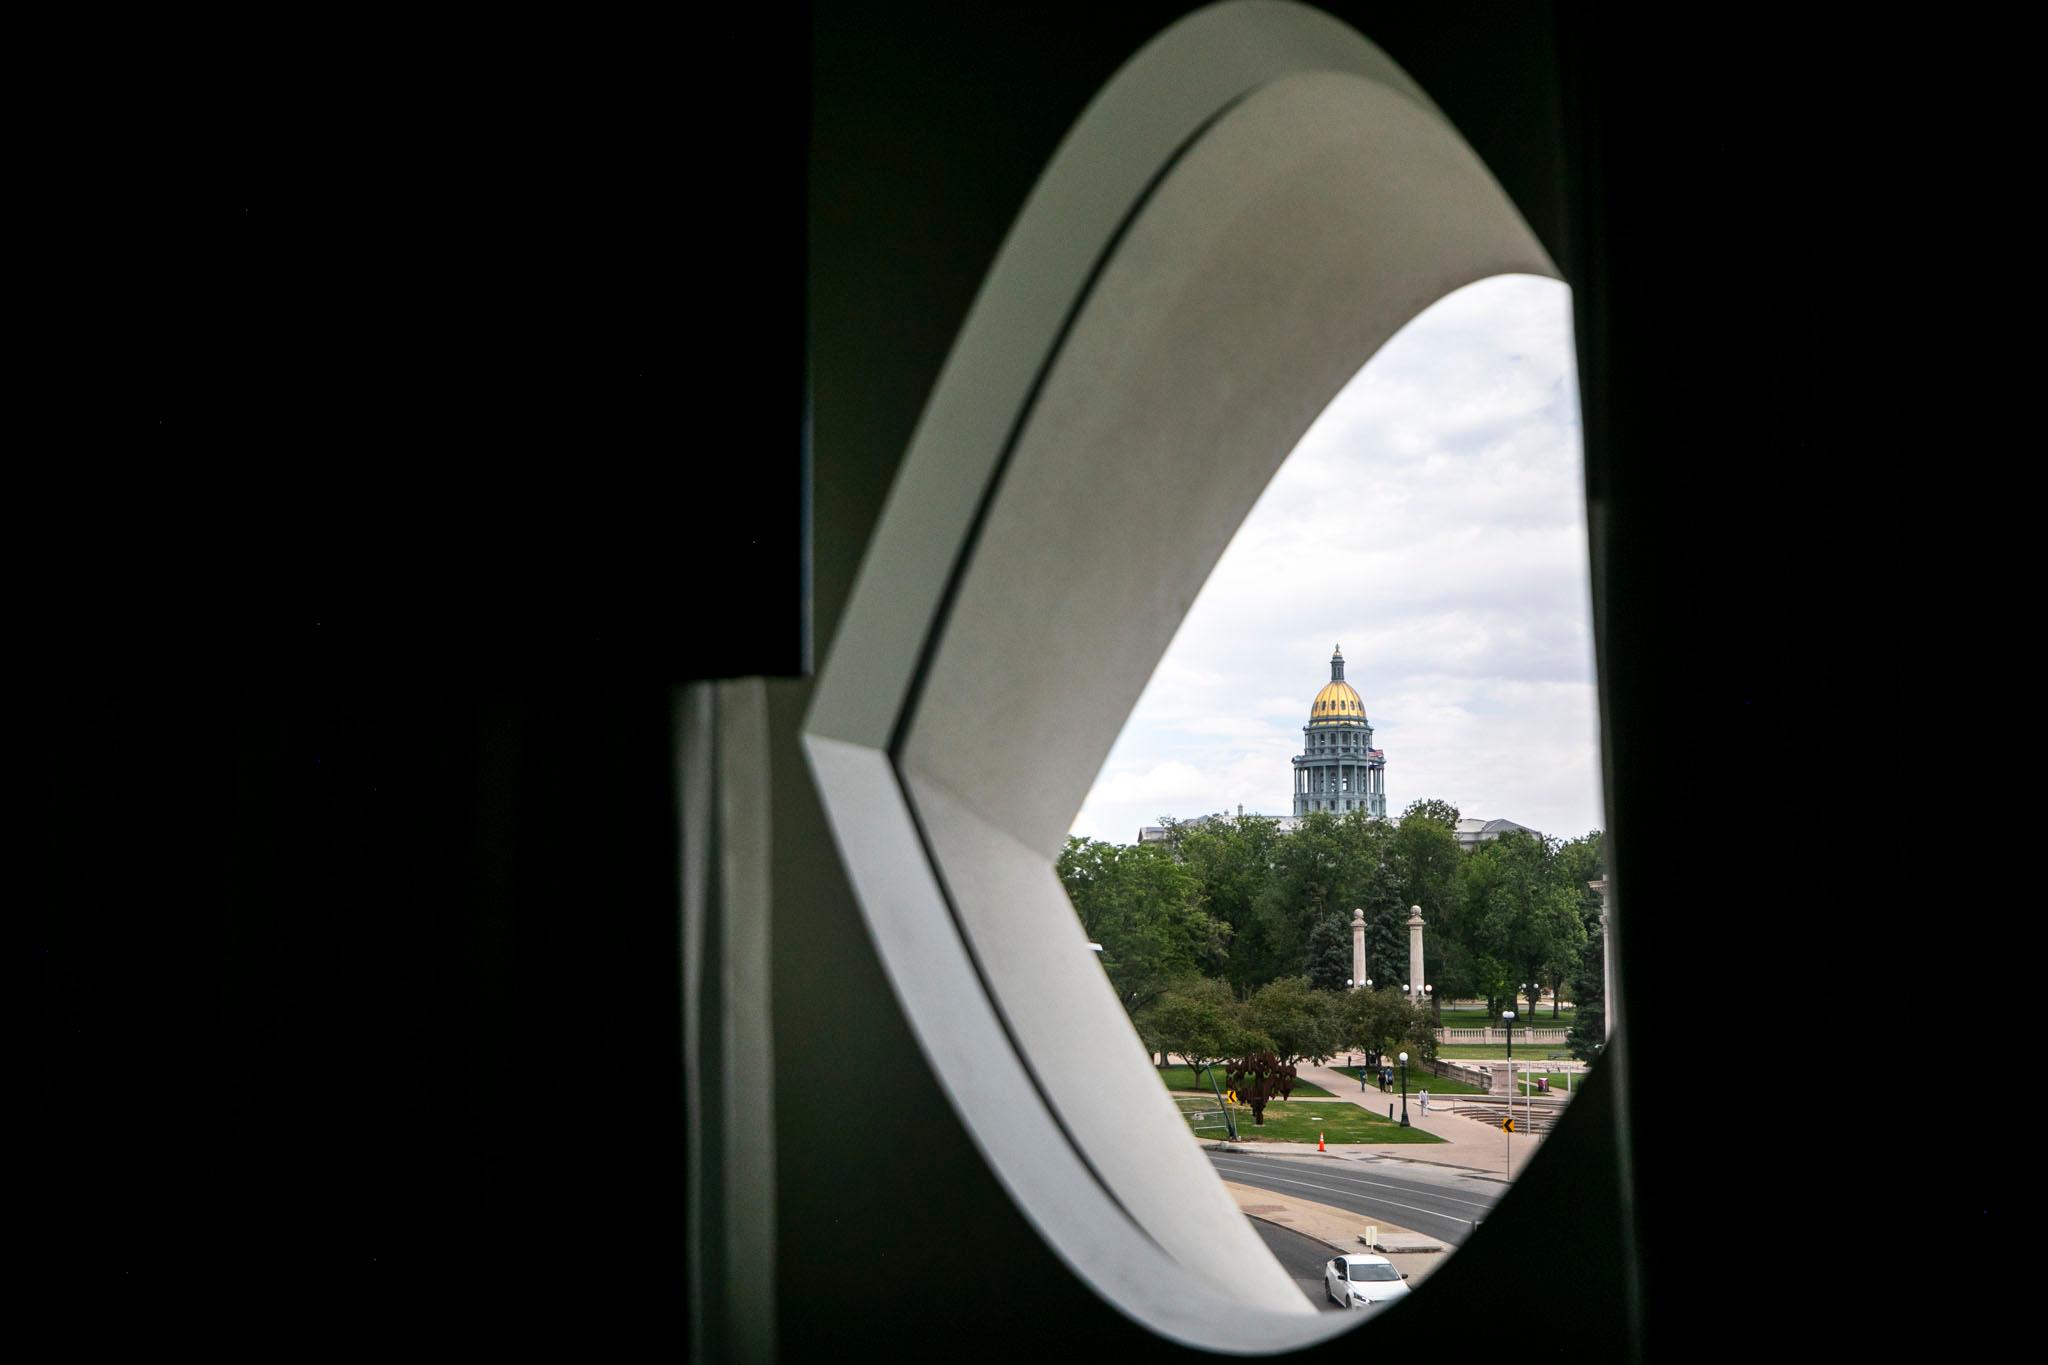 The Capitol's gold dome stretches over green trees, seen through an eyeball-shaped window; the room around the window is black.